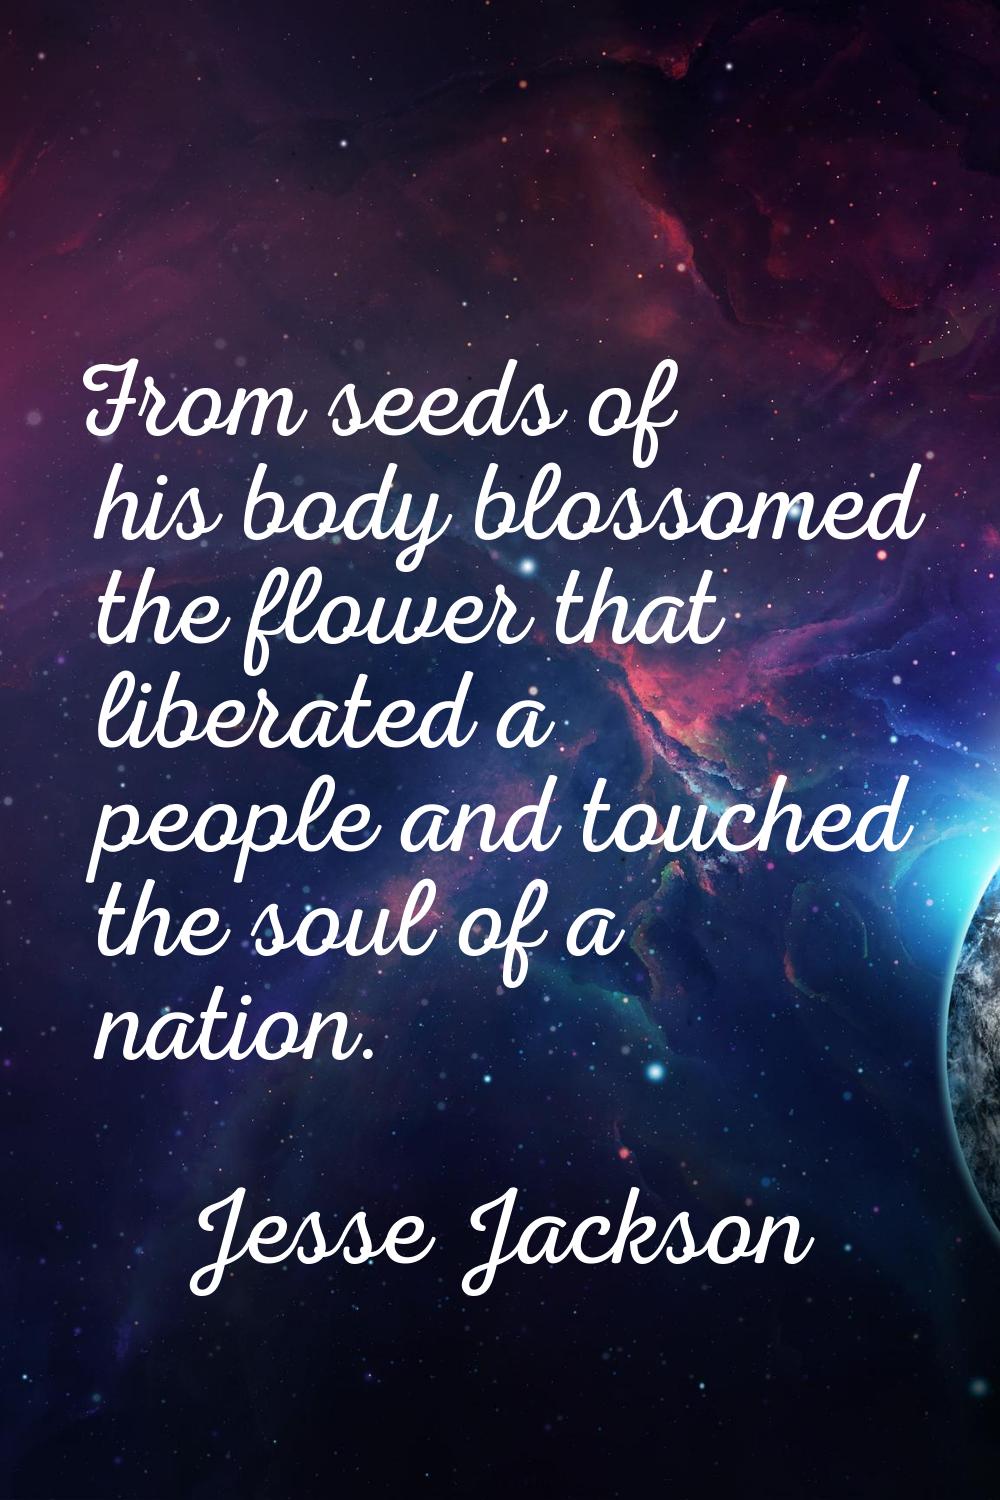 From seeds of his body blossomed the flower that liberated a people and touched the soul of a natio